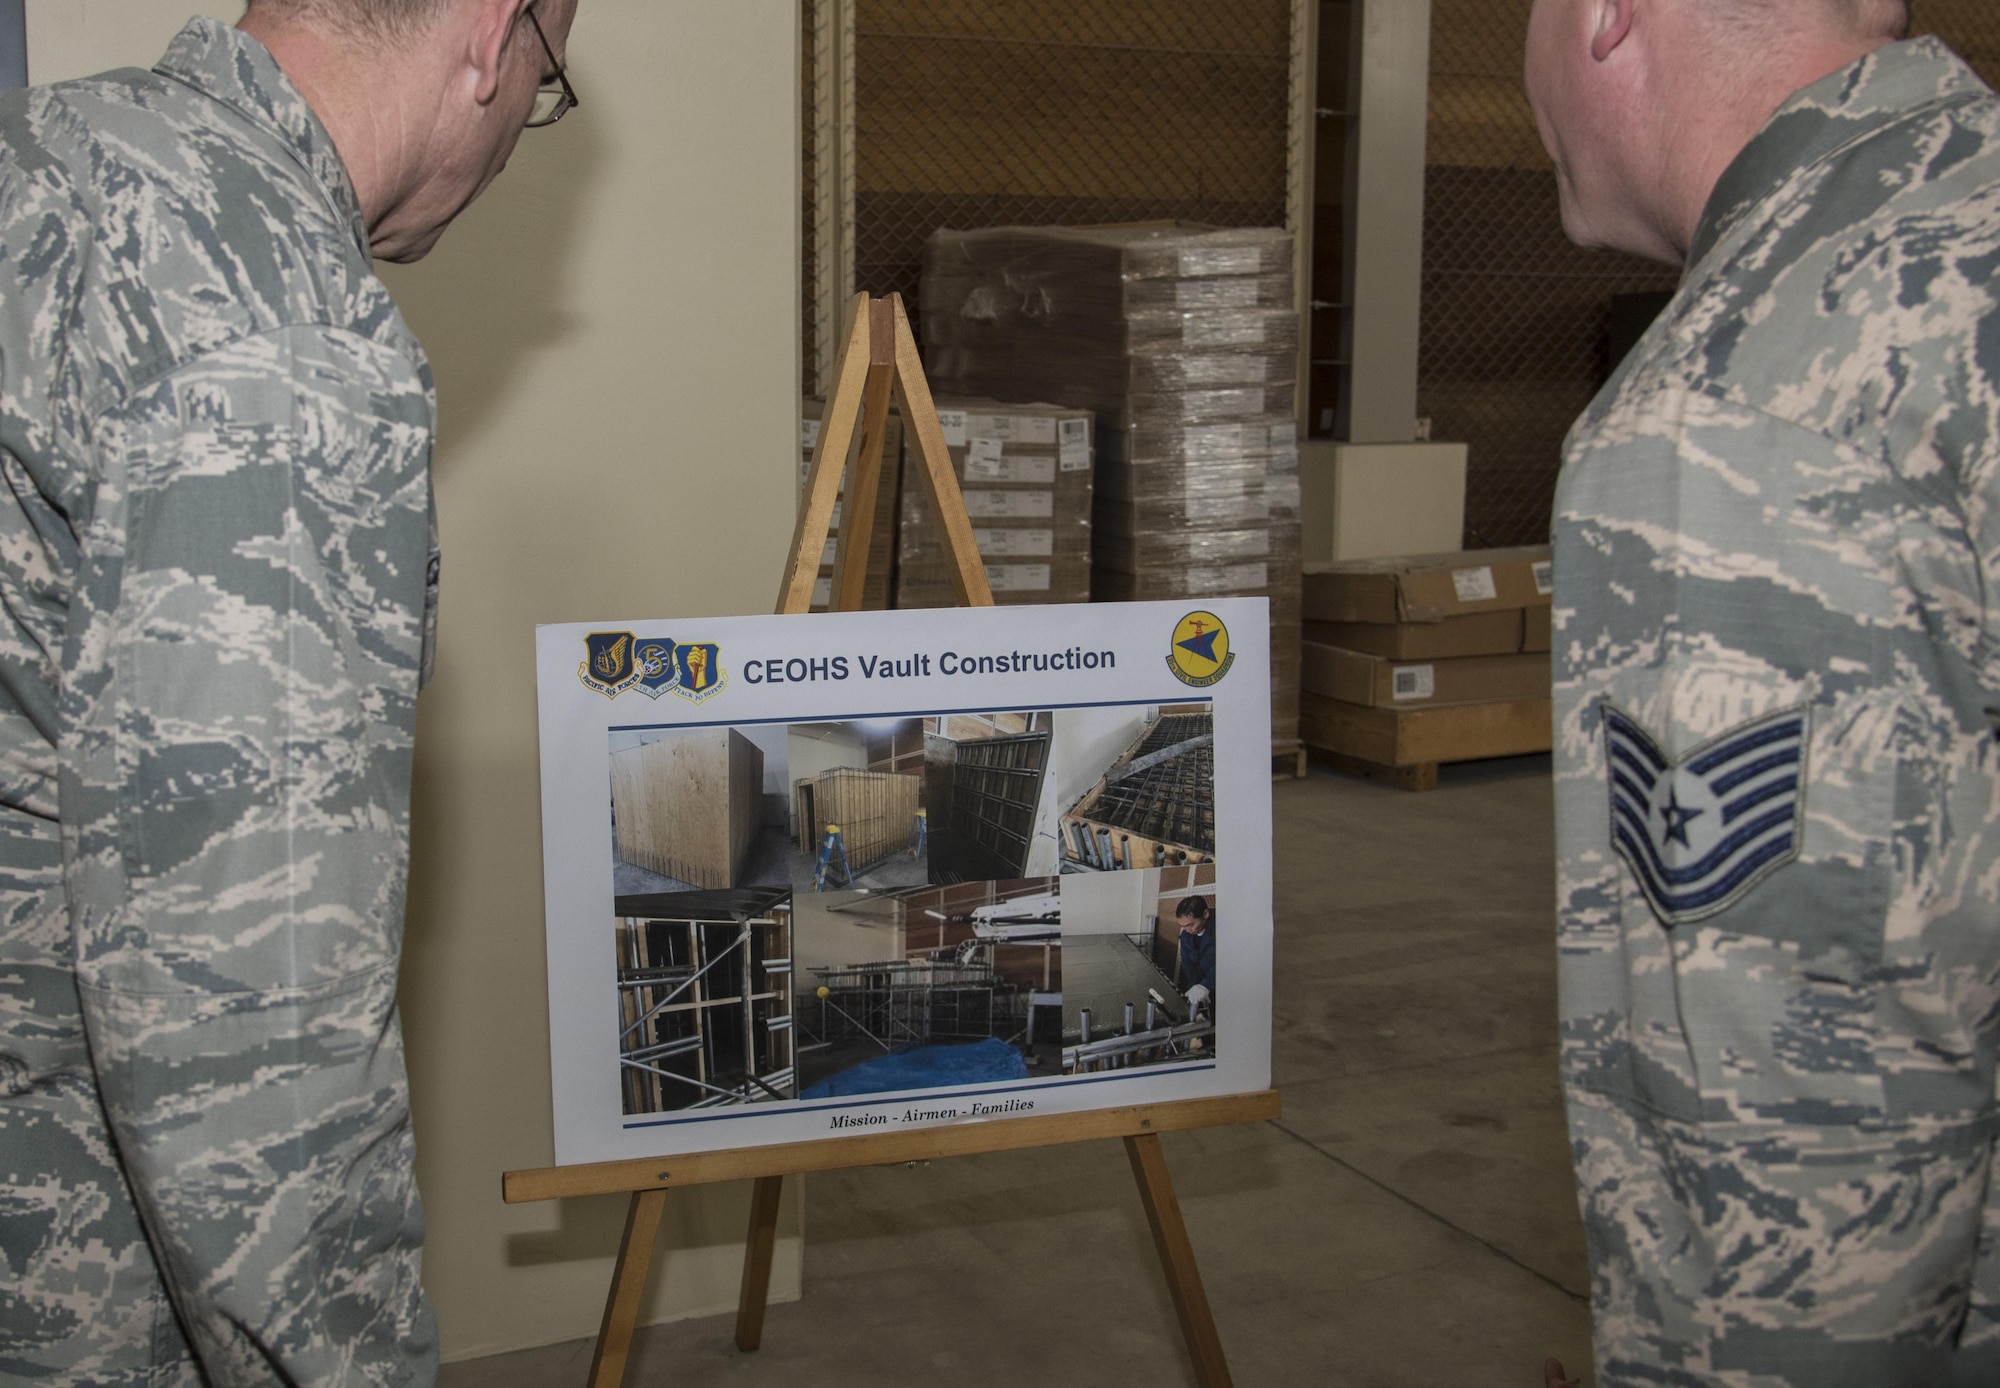 U.S. Air Force Maj. Gen. Timothy S. Green, the Air Force Director of Civil Engineers and Deputy Chief of Staff for logistics, engineering and force protection with Headquarters U.S. Air Force, left, and Tech. Sgt. Glenn Traylor, carpentry shop NCO in charge with the 35th Civil Engineer Squadron, right, view vault construction photos at Misawa Air Base, Japan, July 1, 2016. The vault was built in conjunction with a new explosive ordnance disposal compound. In addition to building the vault, updates were made to the breakrooms, bathrooms and storage units. The improvements ensured a smooth transition for EOD Airmen from their old to new compound. (U.S. Air Force photo by Senior Airman Jordyn Fetter)